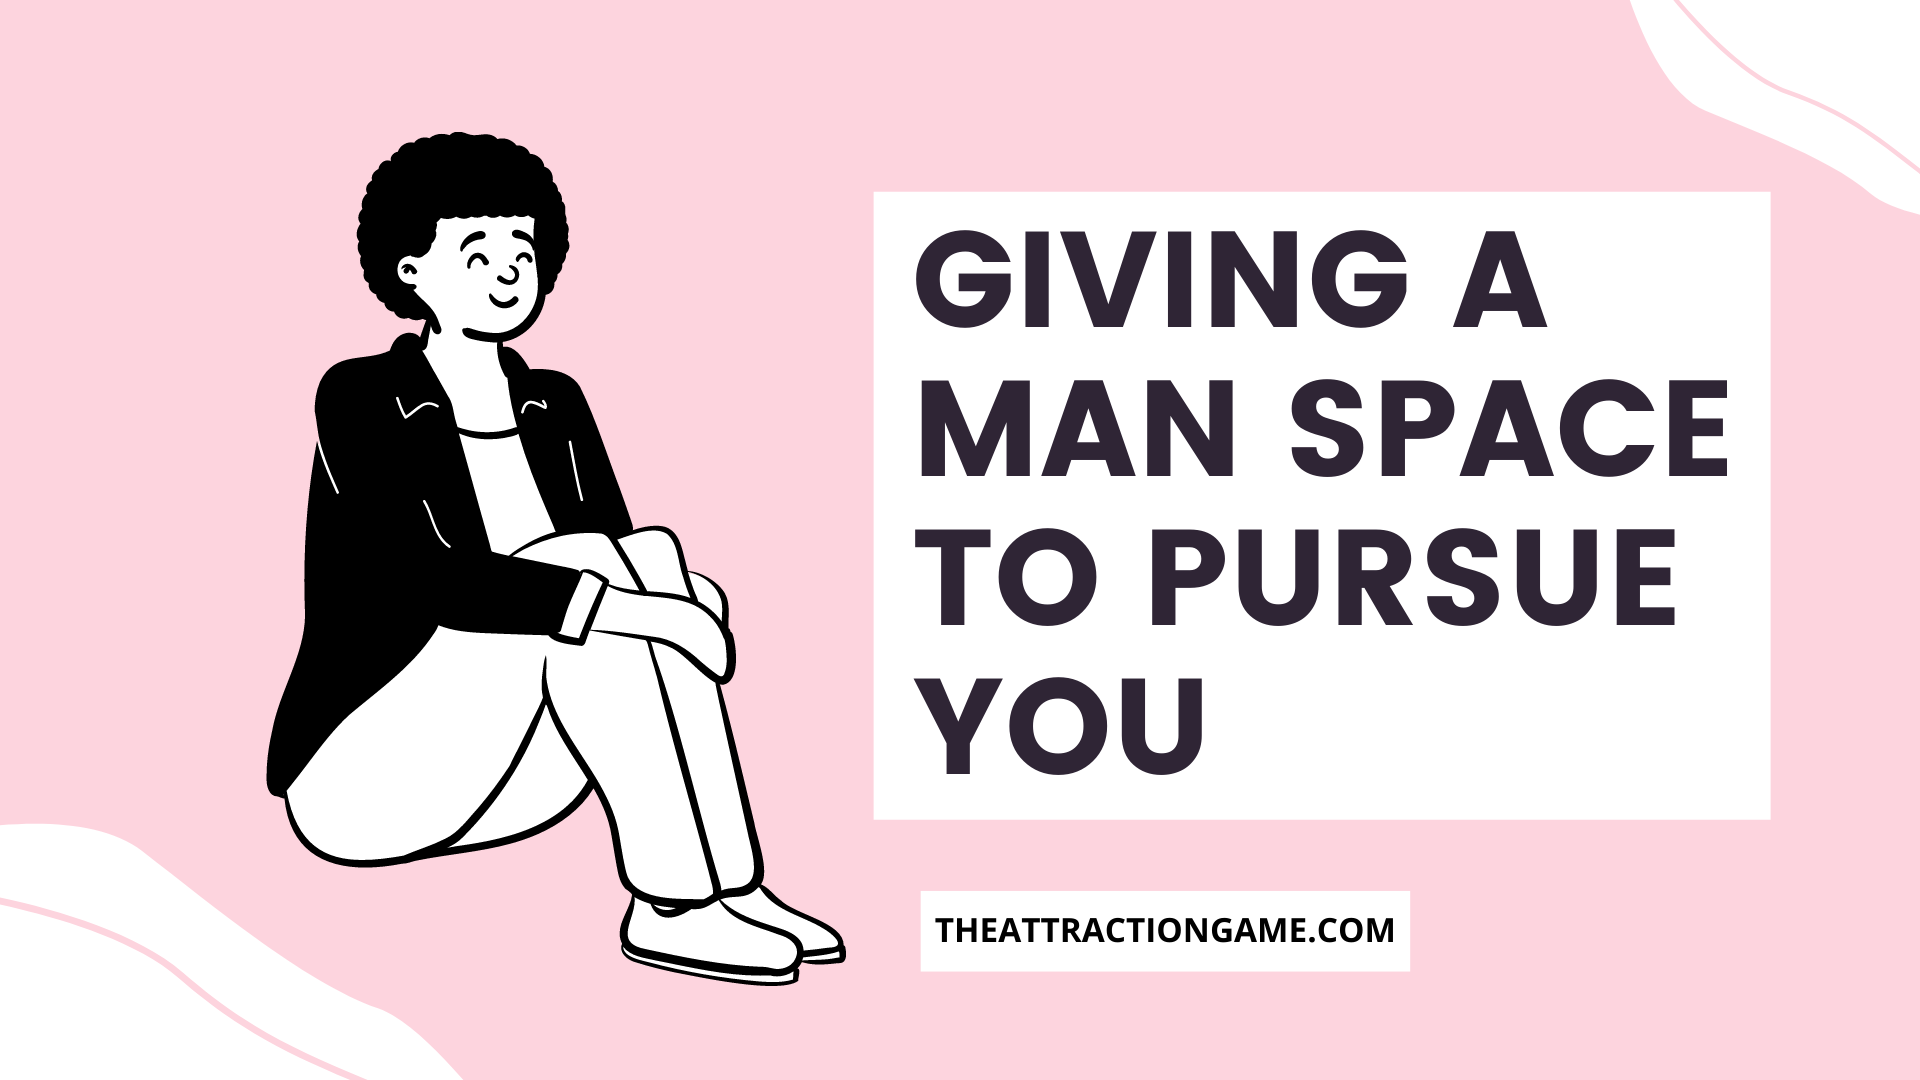 give him space, give a man space, giving a man space to pursue you, give him space to pursue you